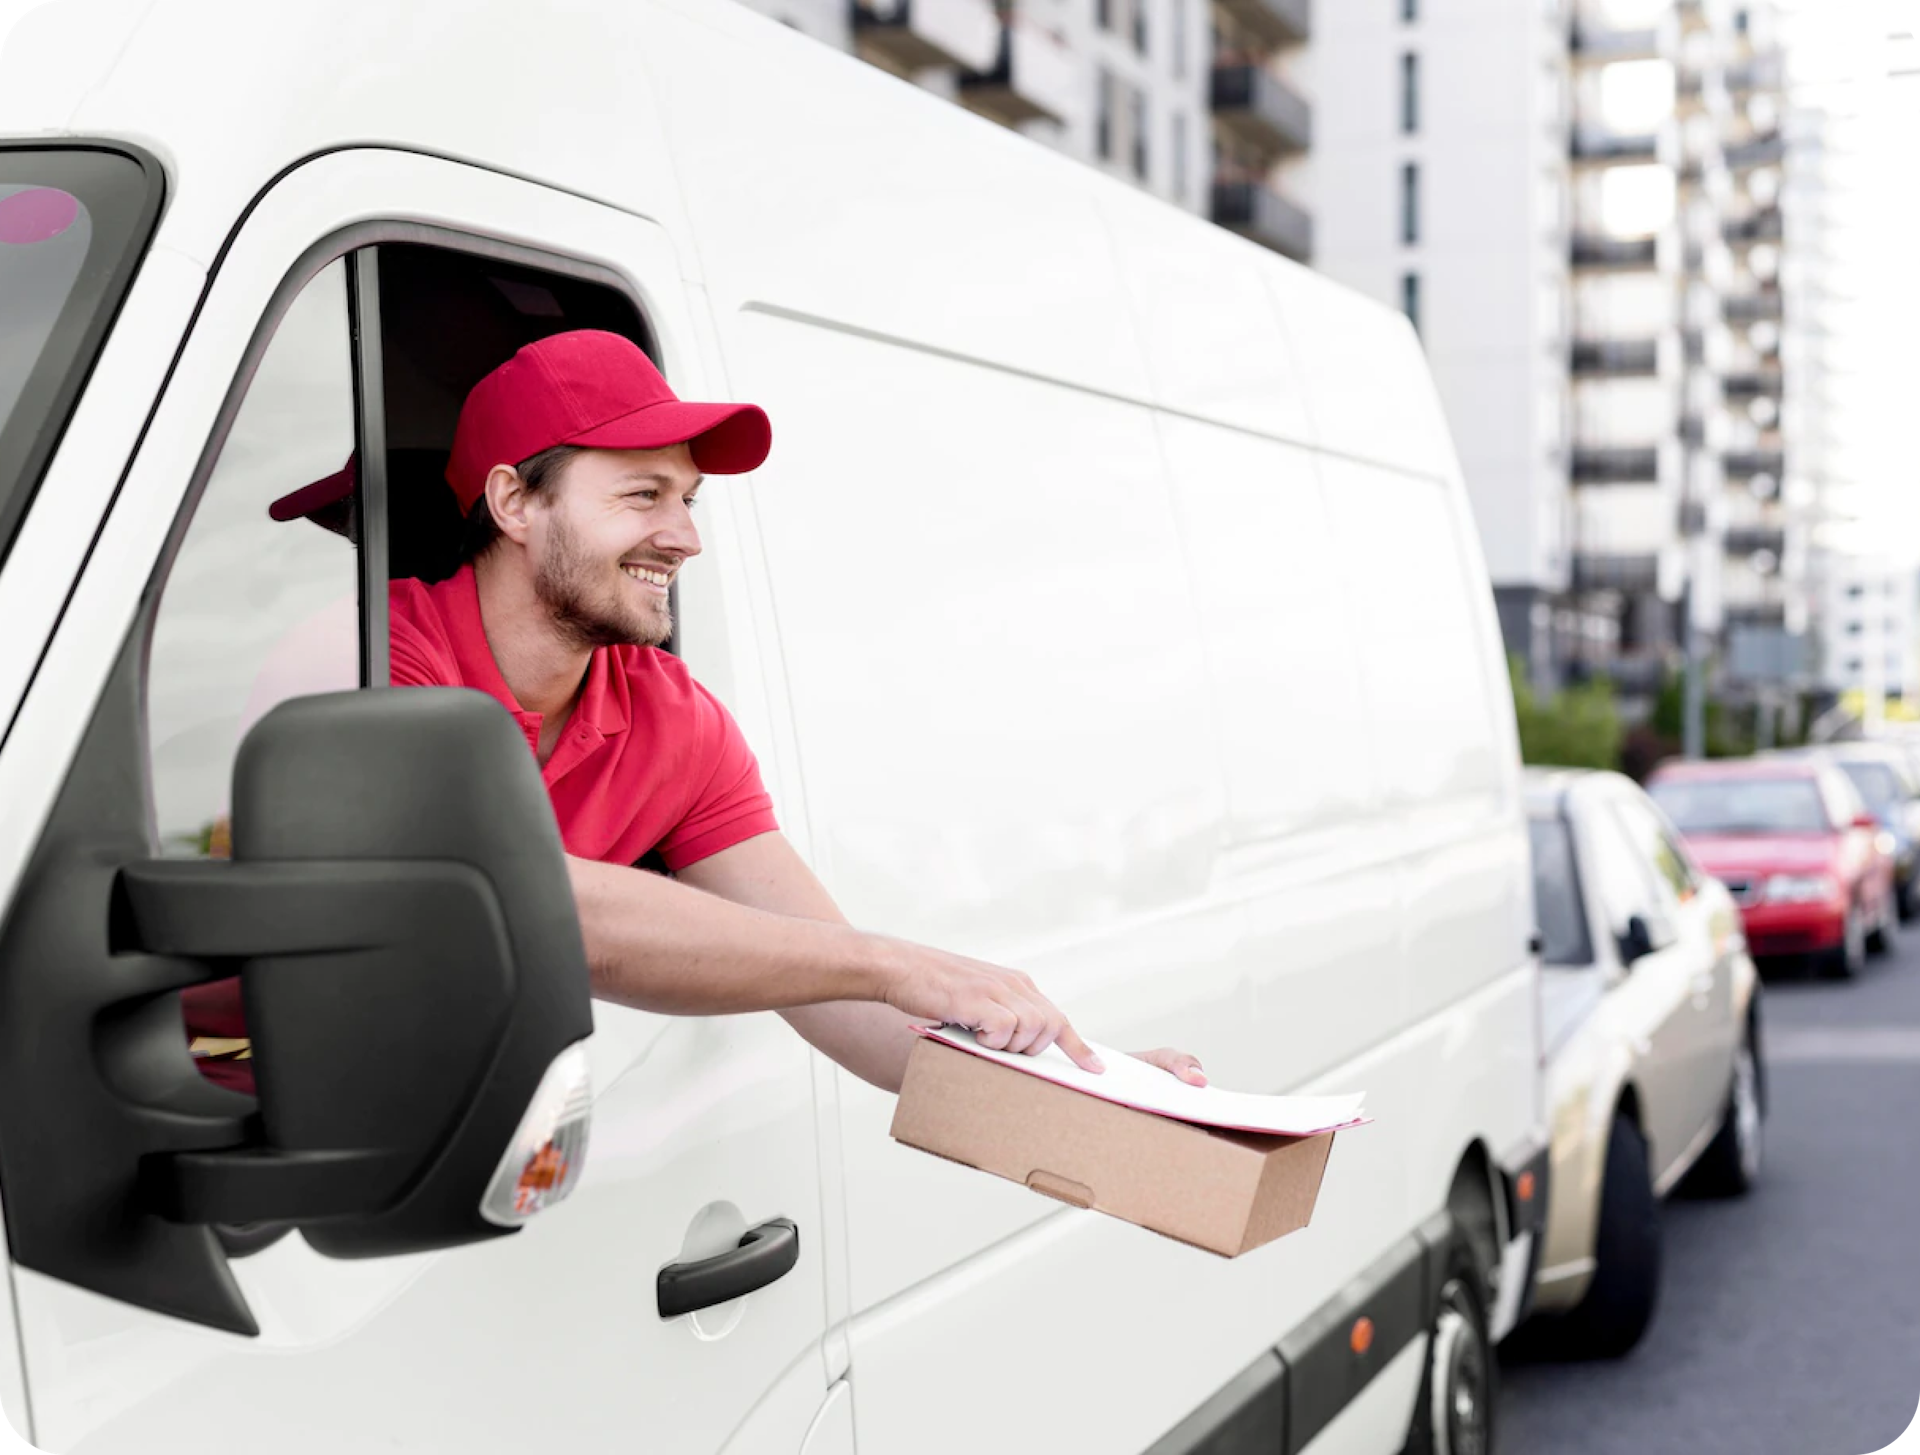 Delivery man smiling in a van